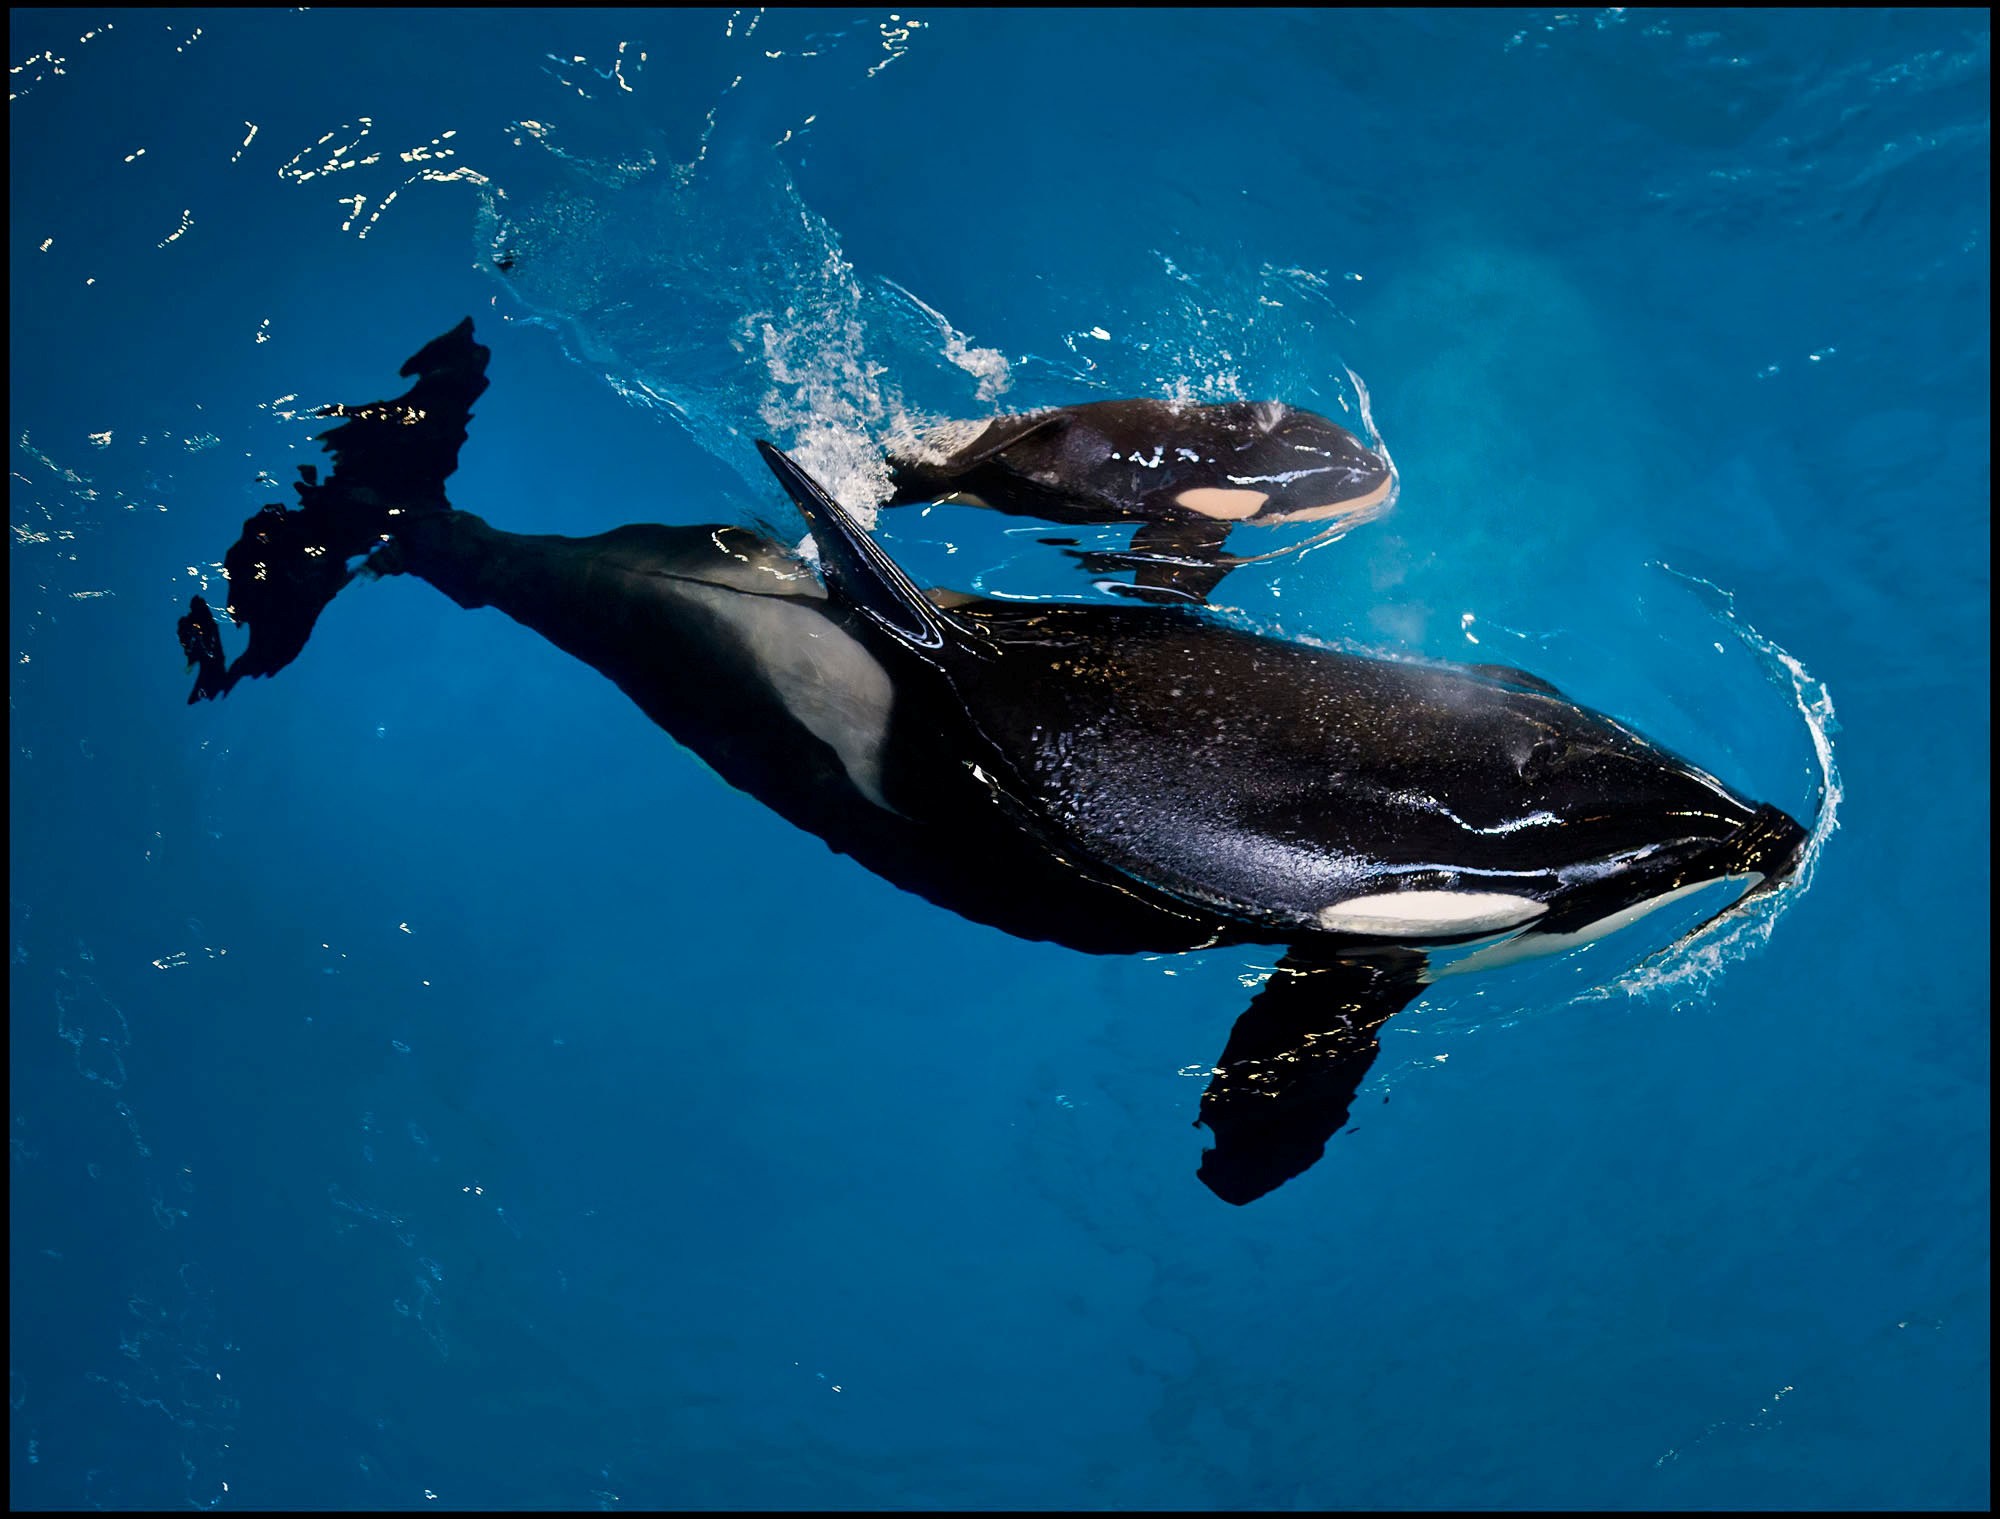 SeaWorld San Antonio’s orca Takara swims with her new calf – the last to be born at a SeaWorld park – in San Antonio, Texas, on April 19. SeaWorld announced last year it was ending its breeding programme for killer whales. Photo: SeaWorld/Handout via Reuters